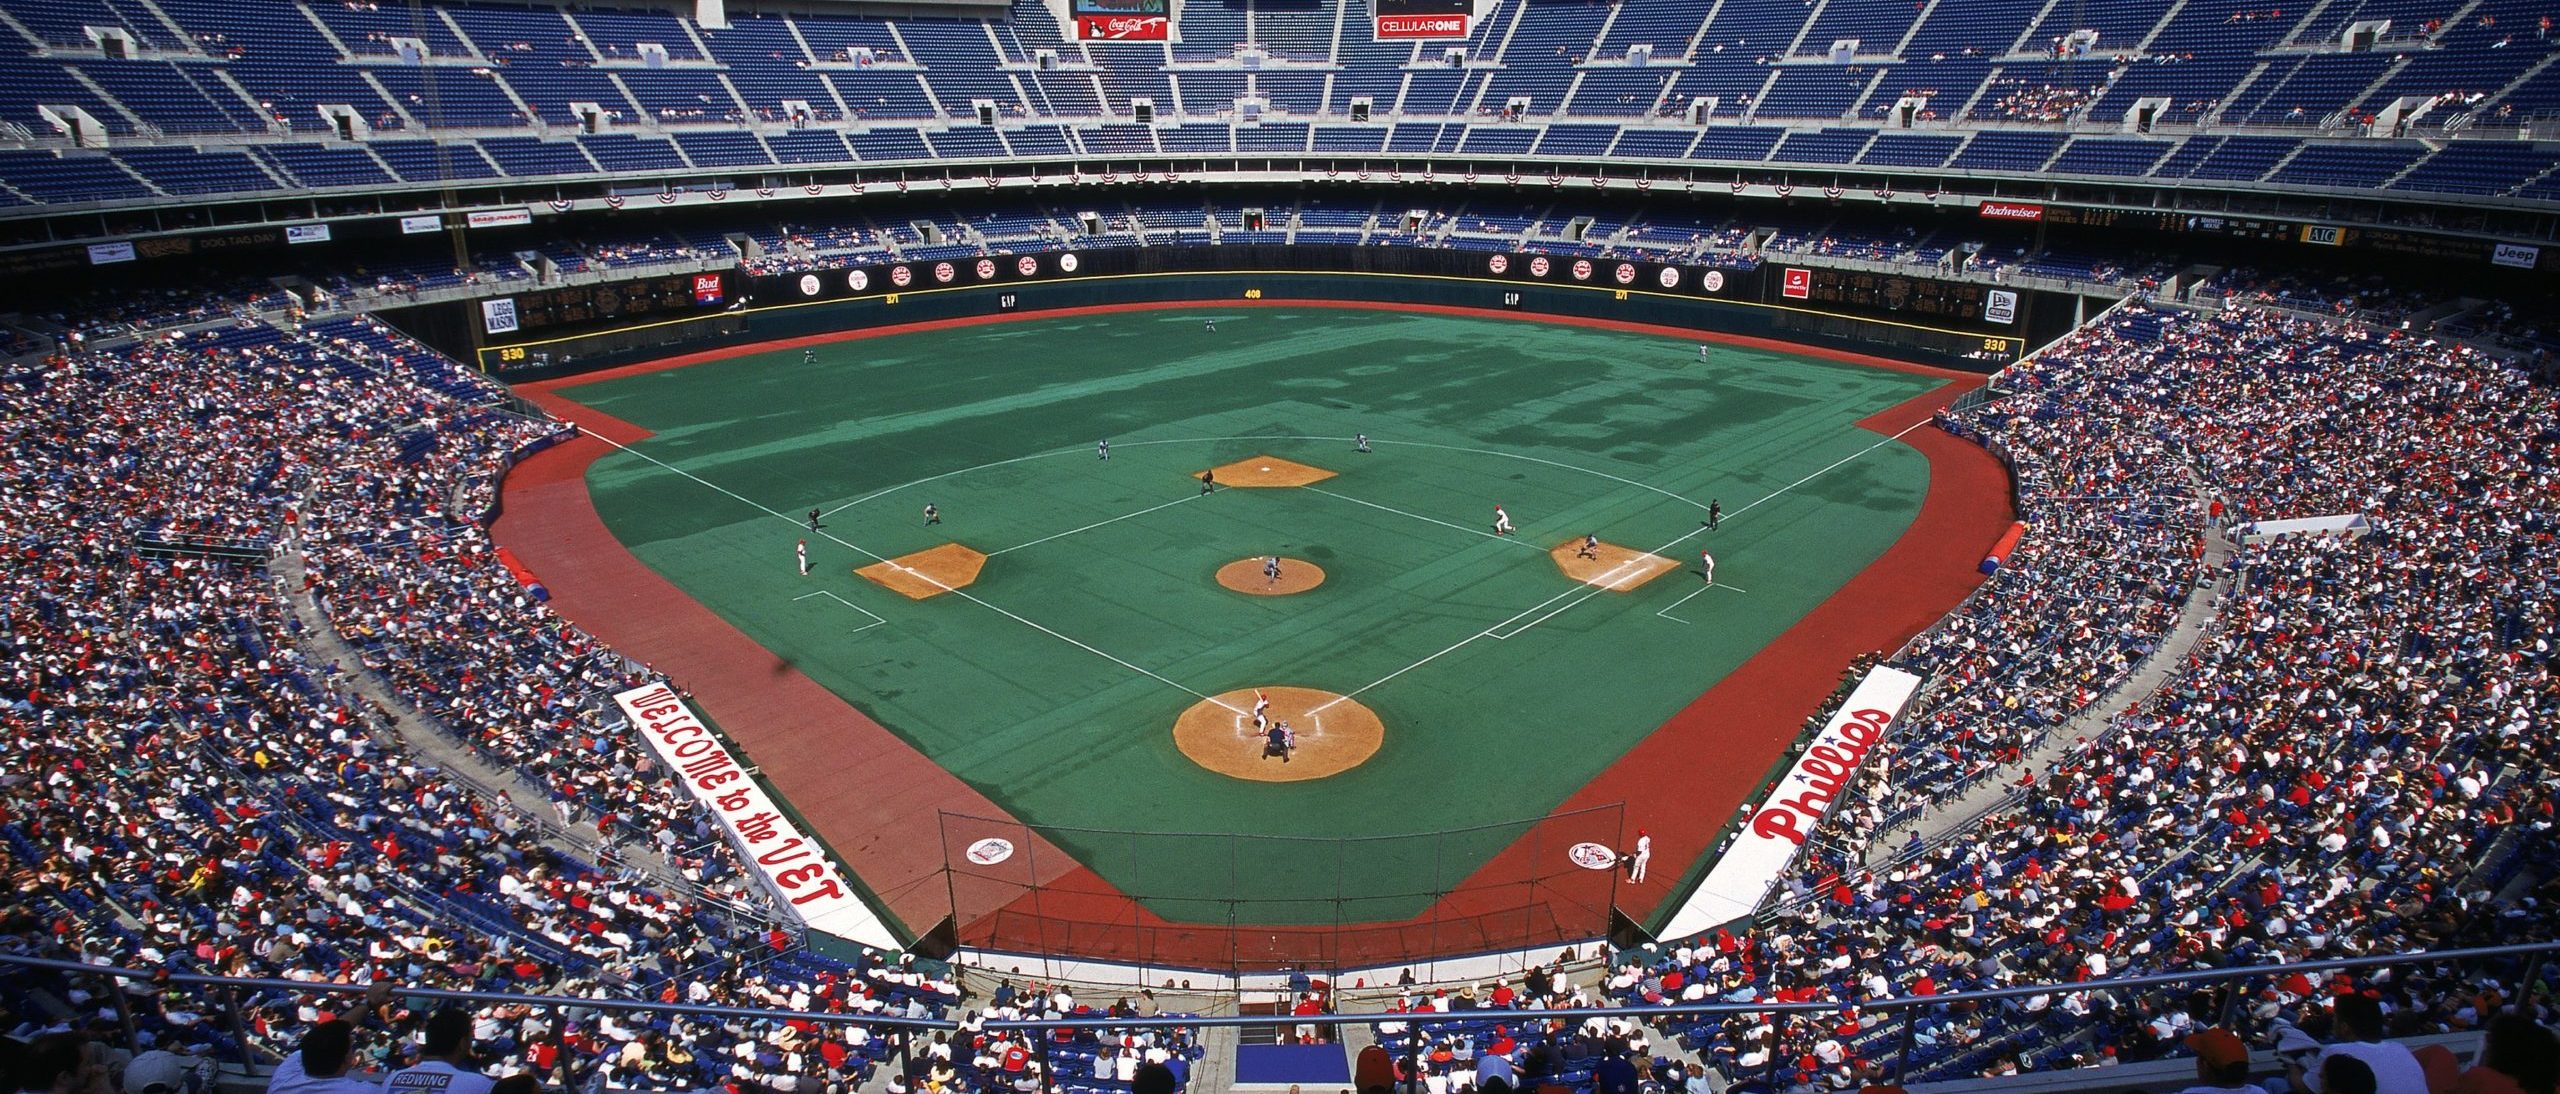 Forever Chemicals' Found in Turf Used in Phillies' Old Stadium